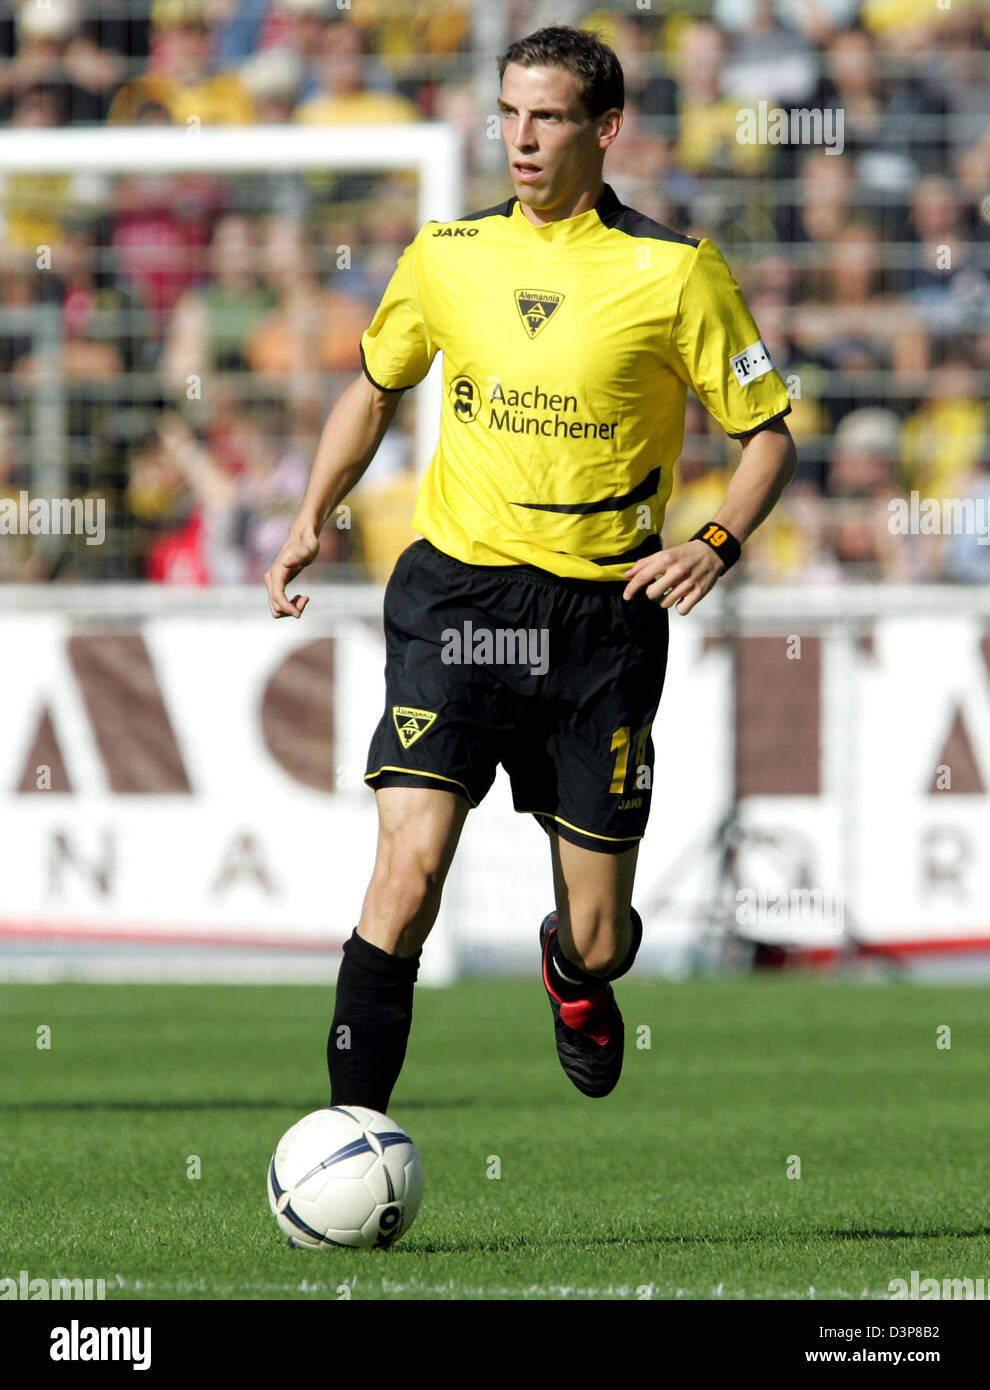 Jan Schlaudraff of Aachen leads the ball during the Bundesliga match Alemannia Aachen vs VfL Bochum at the Tivoli stadium of Aachen, Germany, Saturday, 30 September 2006. The 23-year-old was nominated for the national side by head coach Joachim Loew this week. Photo: Rolf Vennebernd (ATTENTION: BLOCKING PERIOD! The DFL permits the further utilisation of the pictures in IPTV, mobile Stock Photo